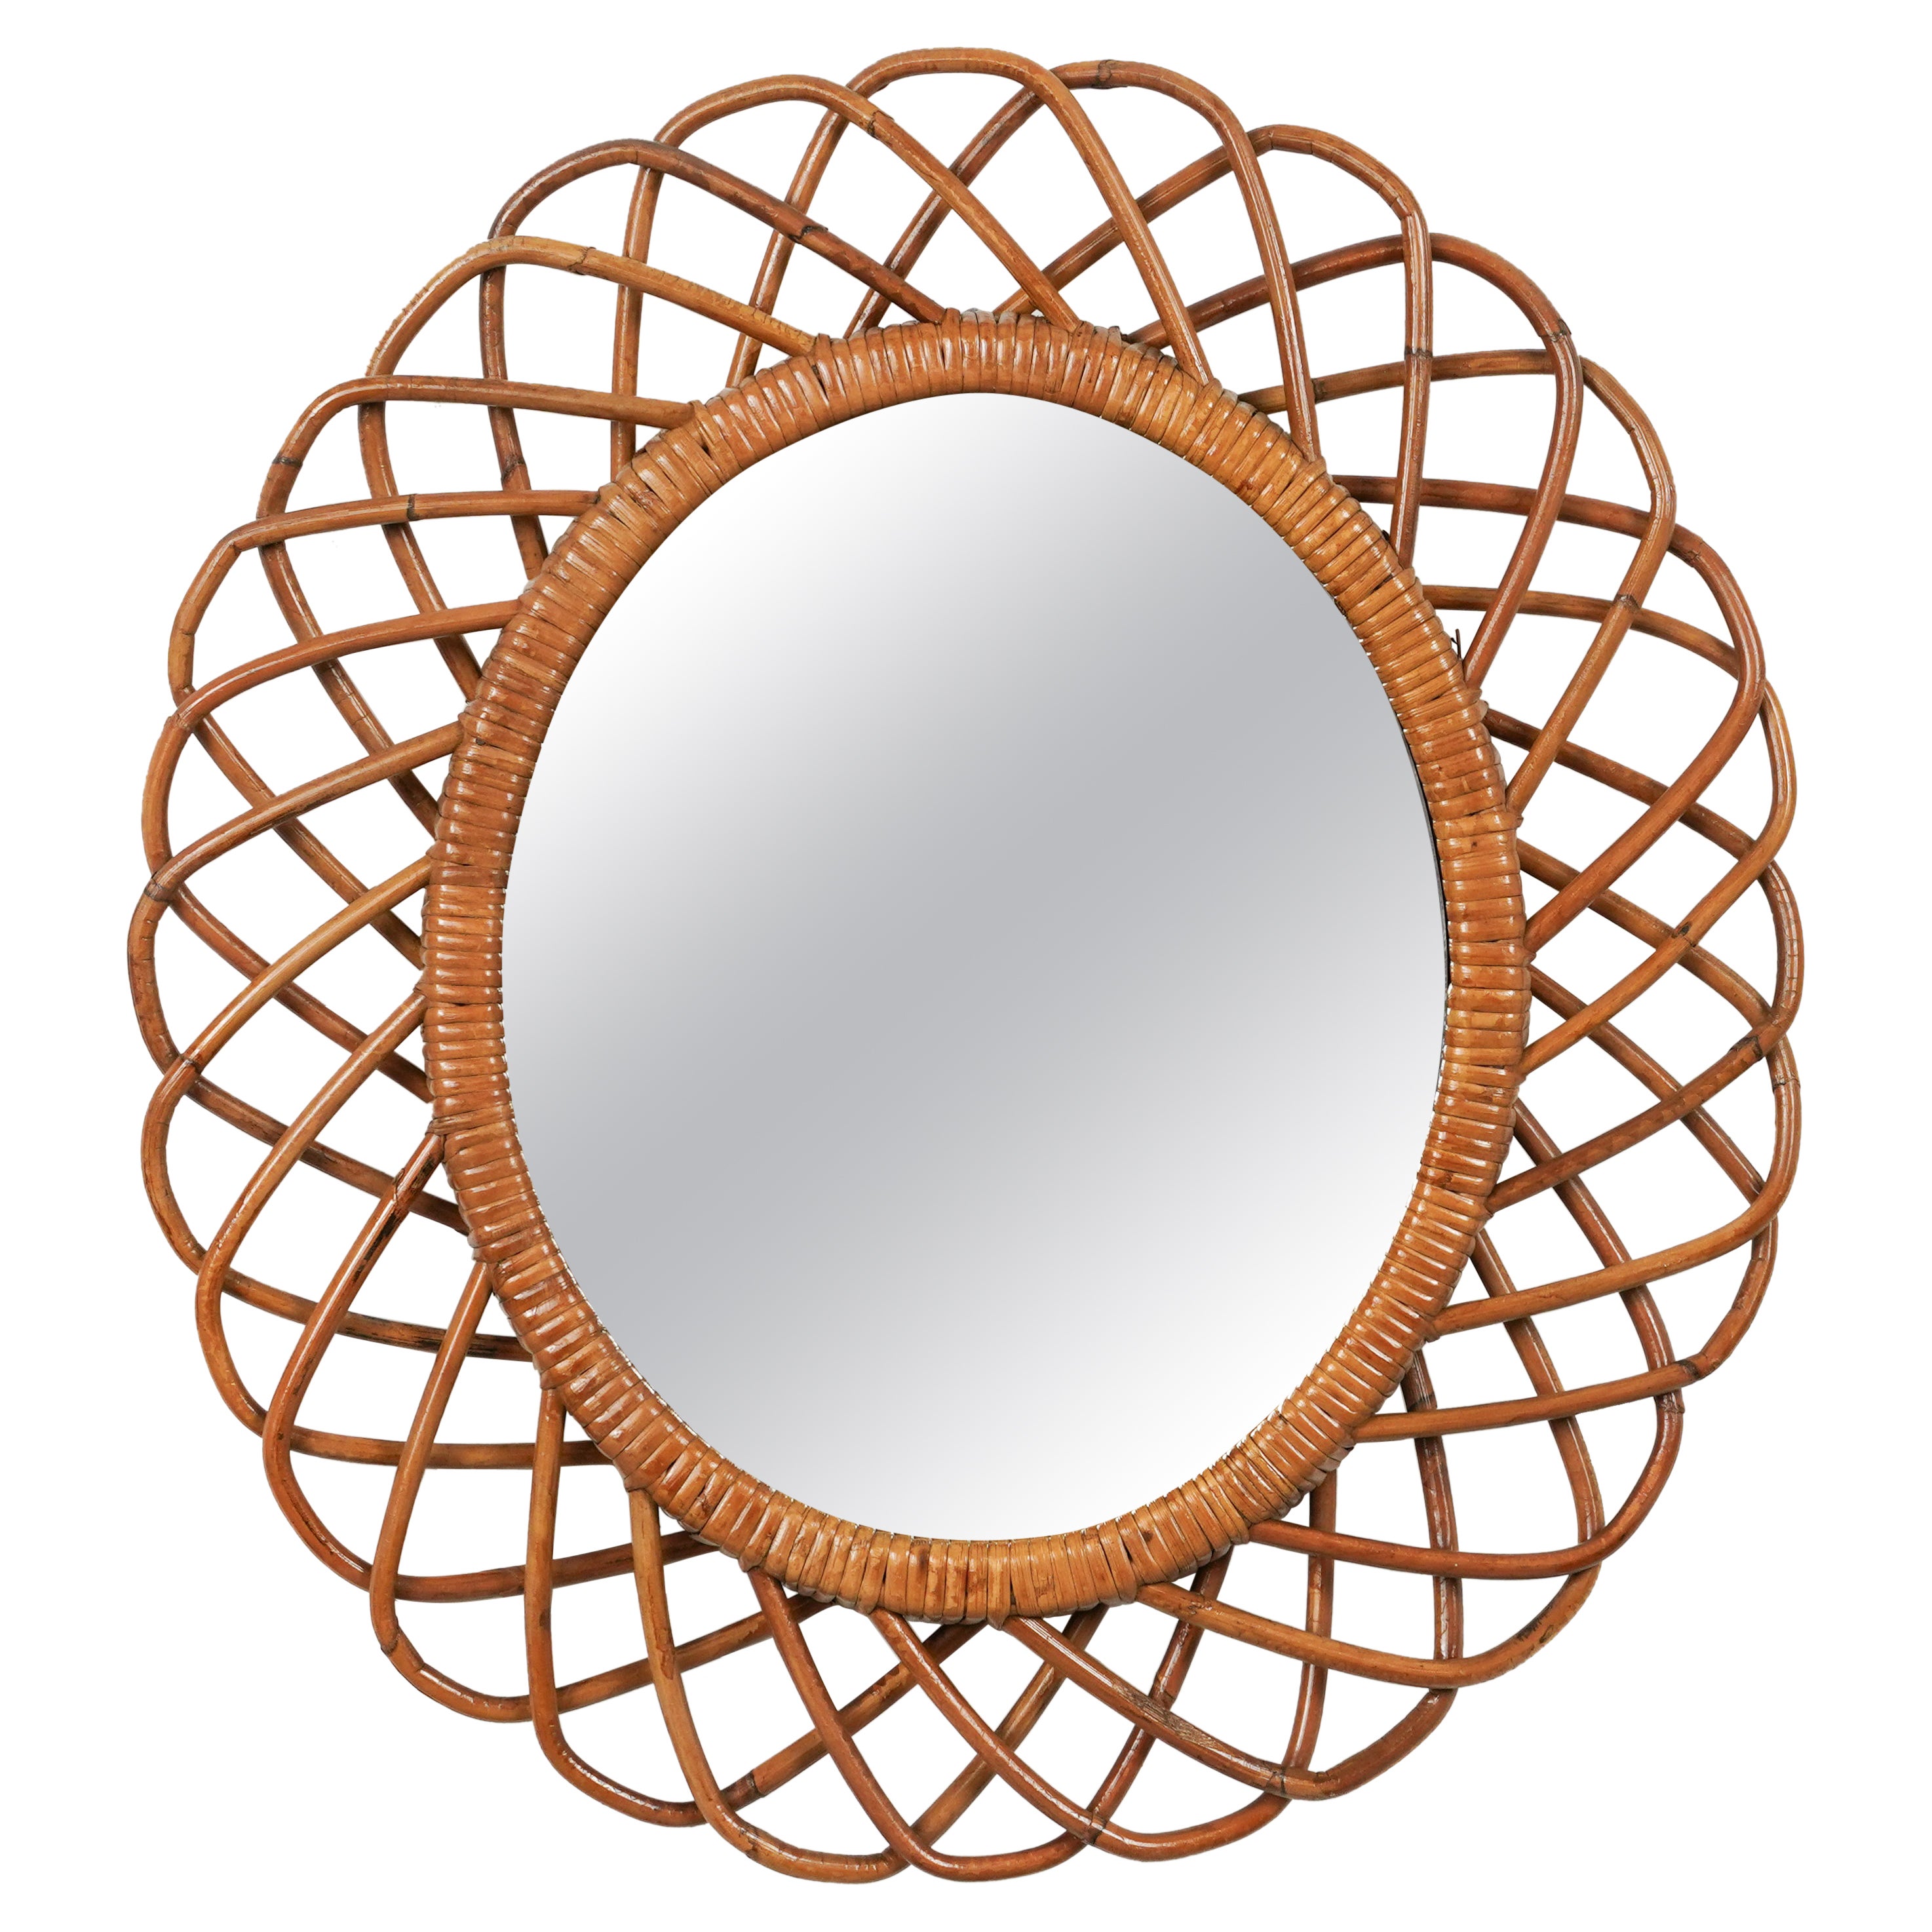 Midcentury Rattan and Bamboo Oval Wall Mirror, Italy 1960s For Sale